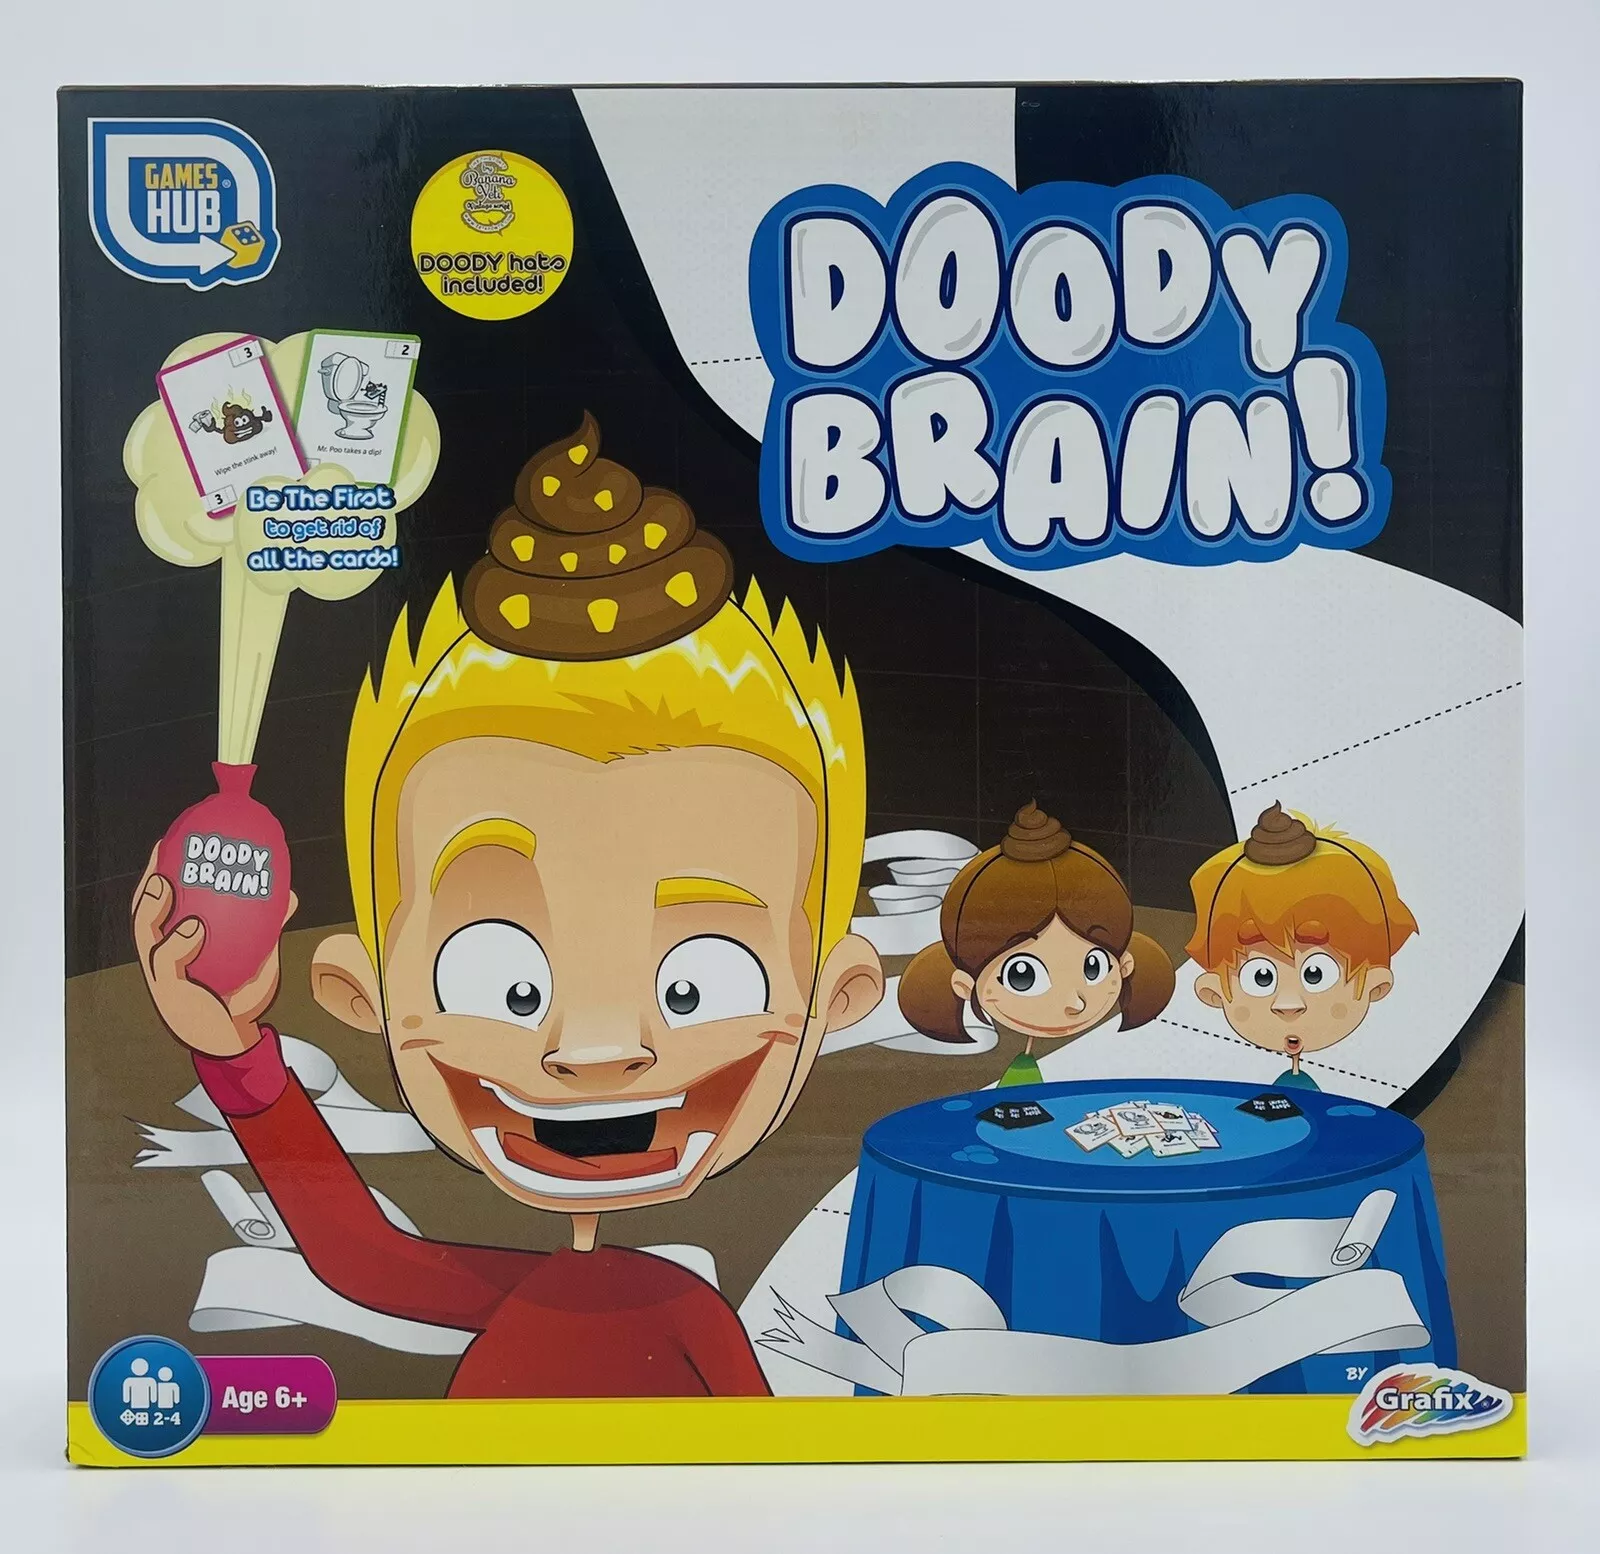 Doody Brain Game w/ Turd Poop Hat Childs by Games Hub Ages 6+